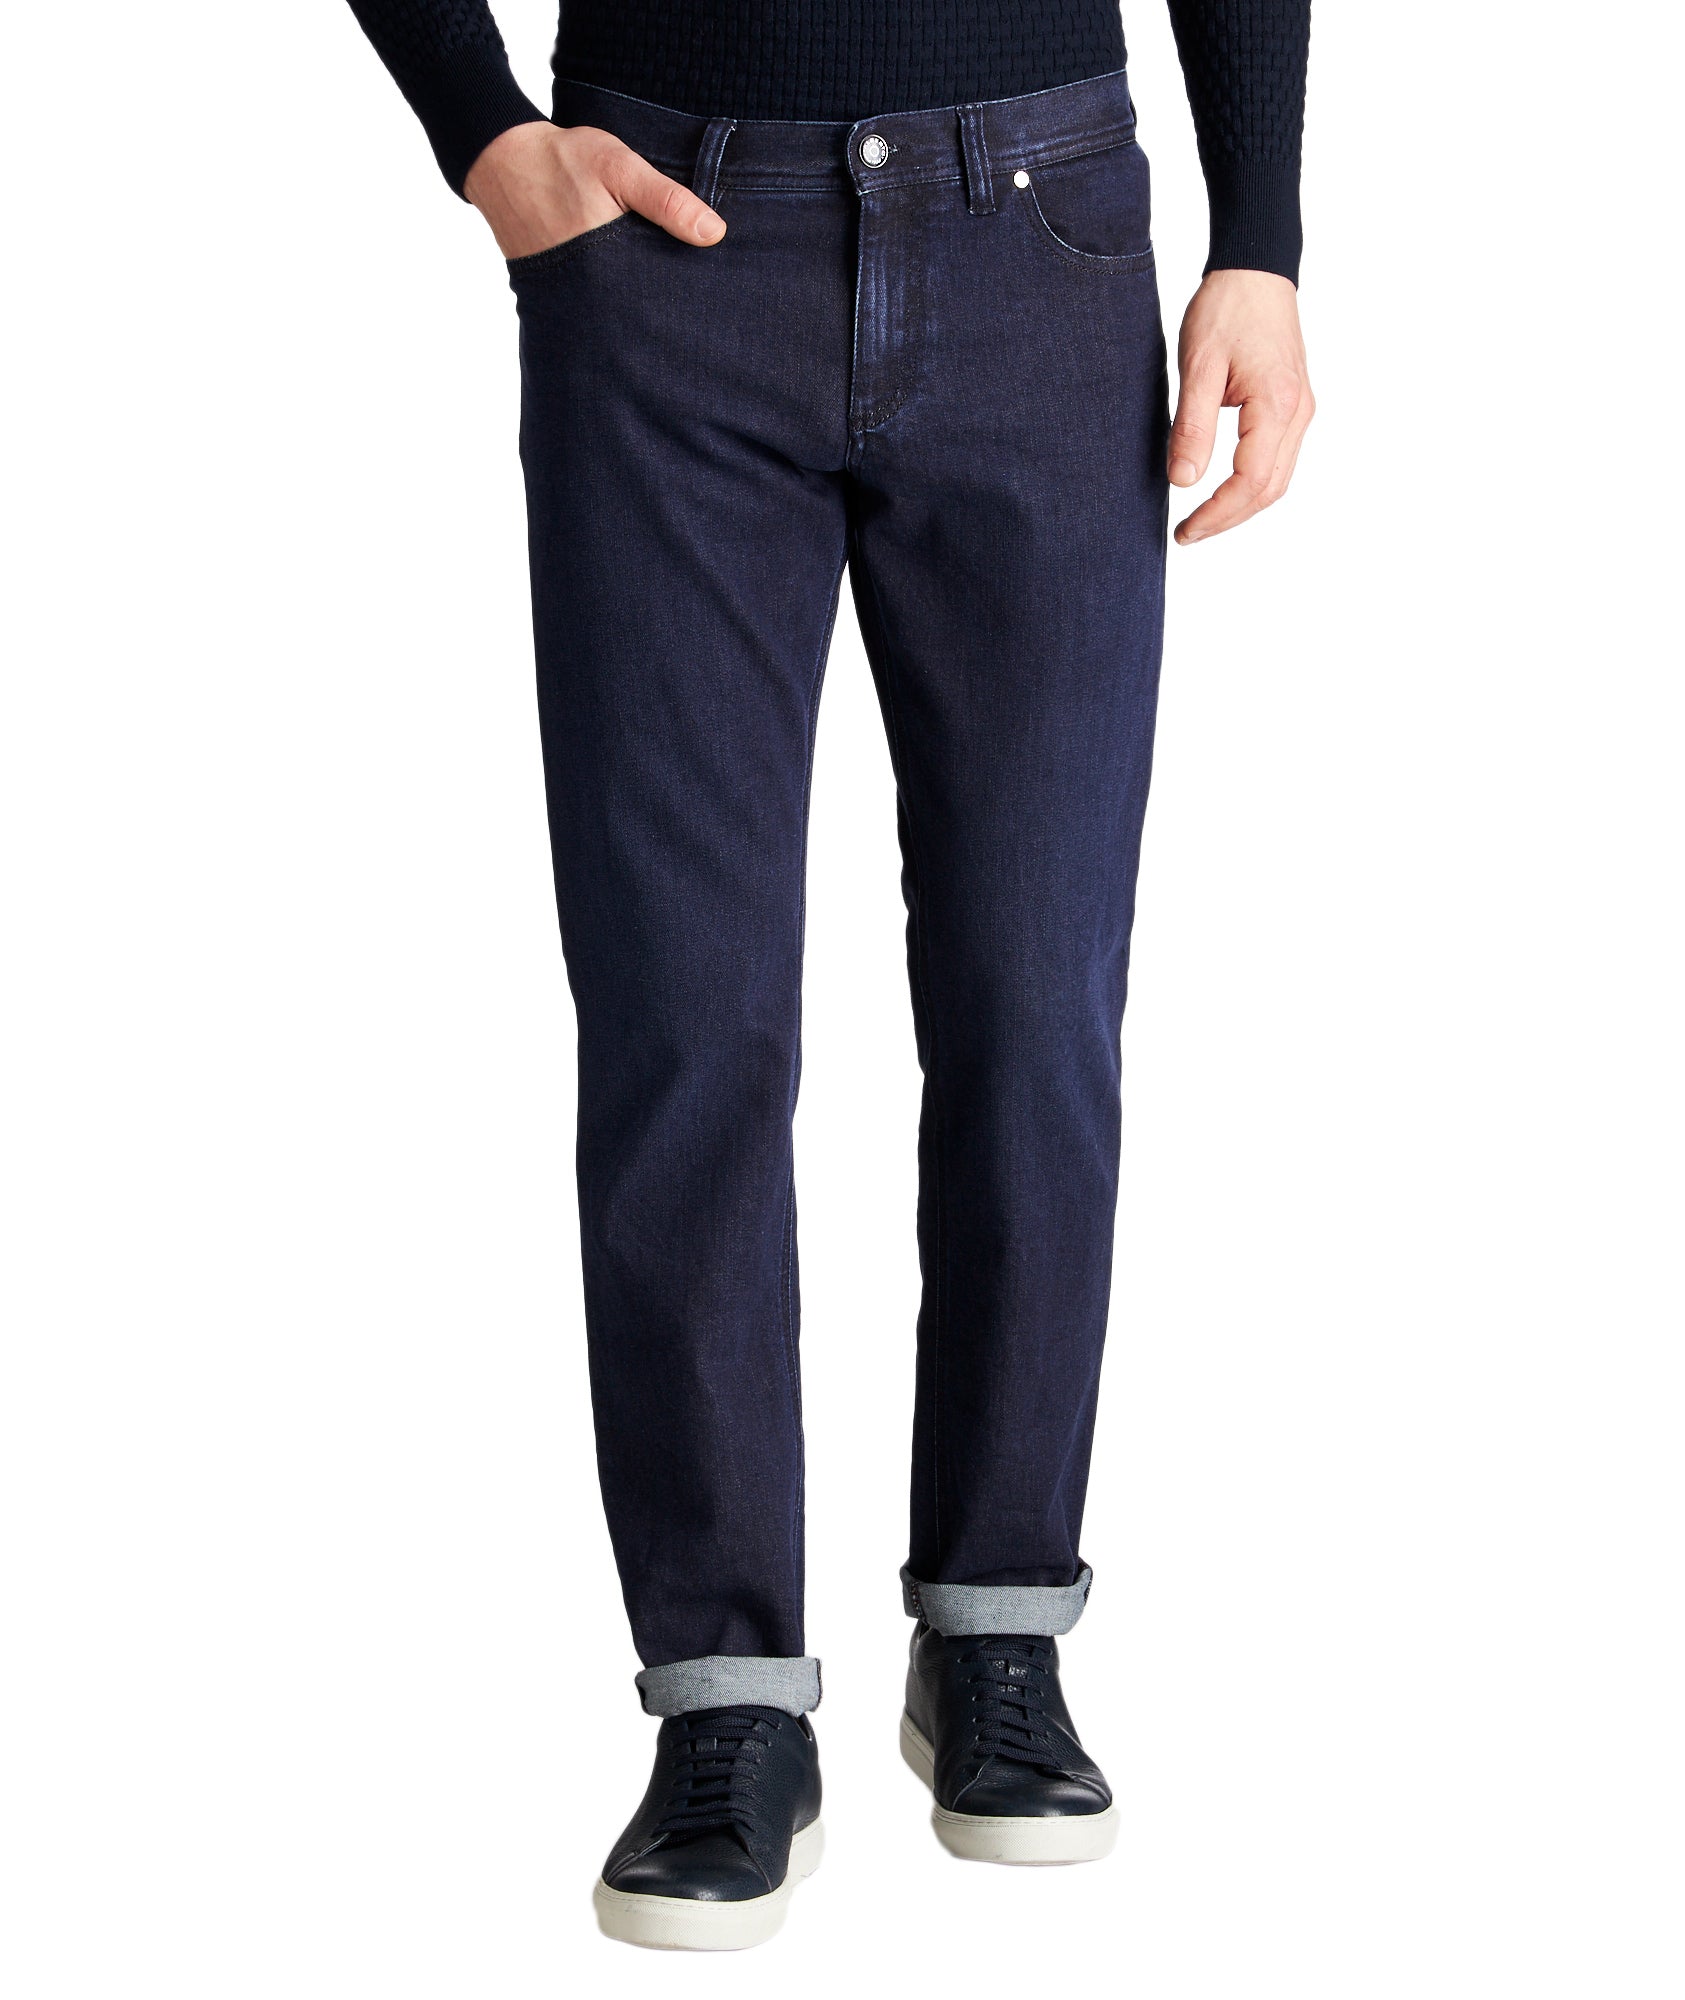 Alberto Jeans - Pipe Slim Fit Ed's Imports